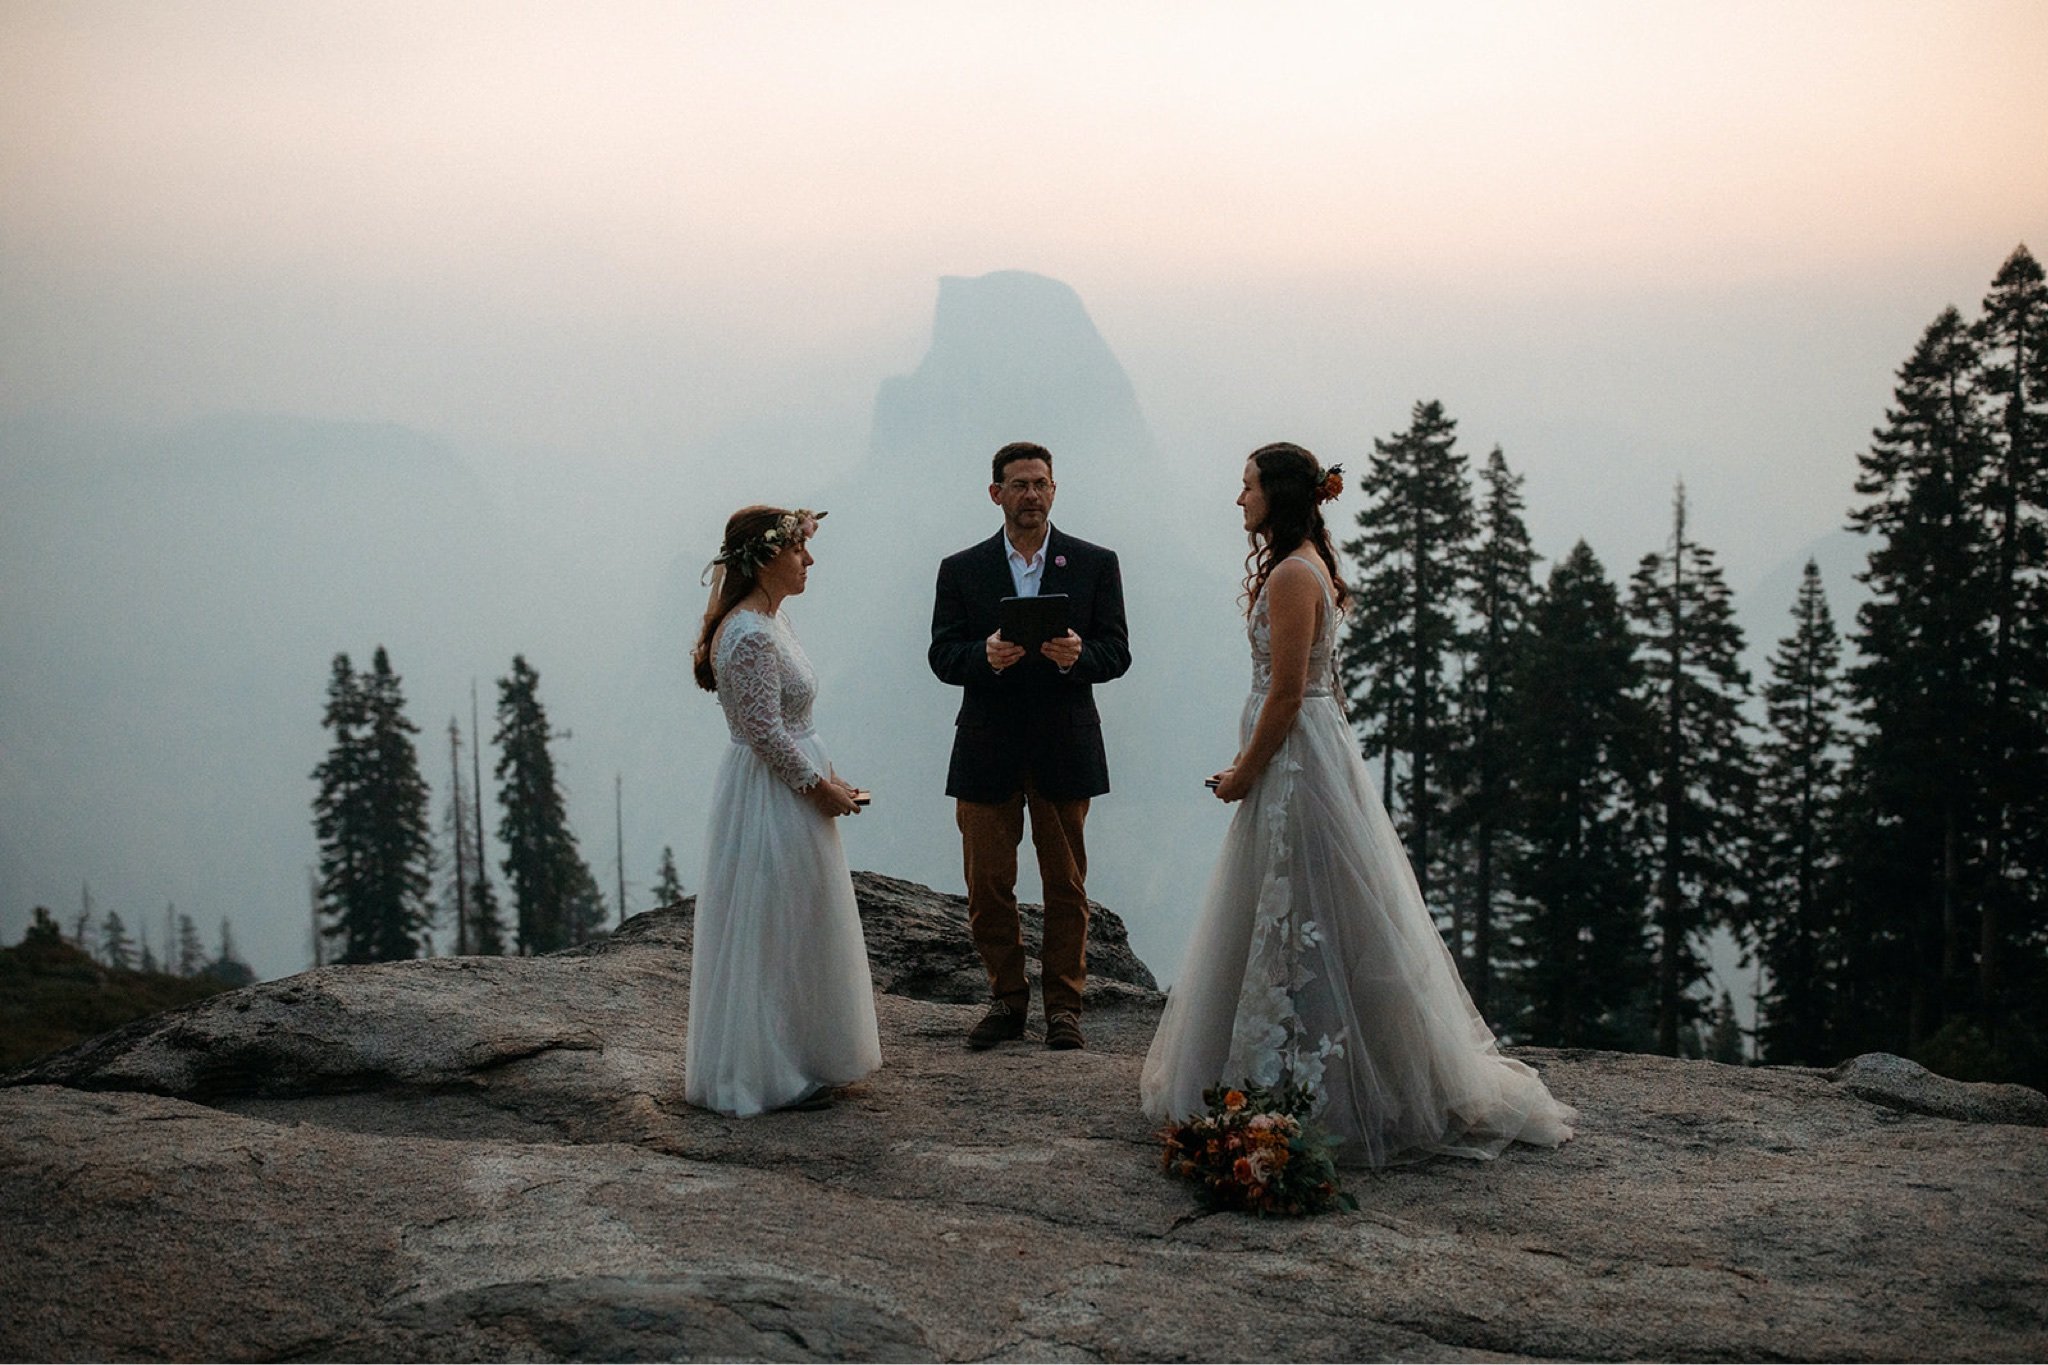 Yosemite National Park Elopement with Two Brides-Will Khoury60.jpg